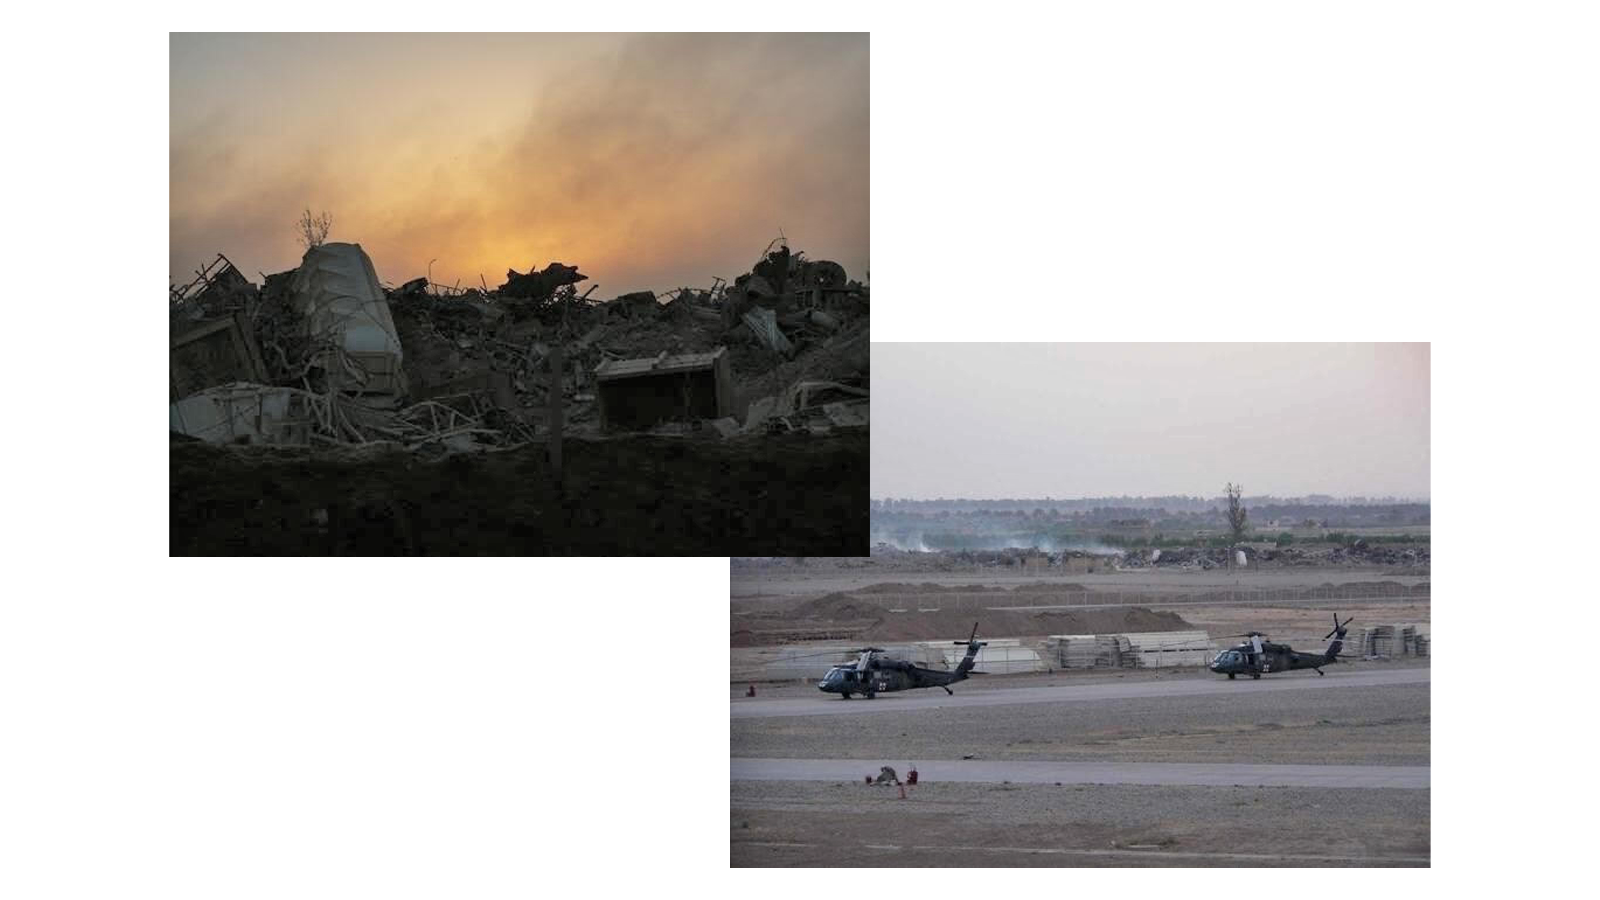 Smoke billows behind a heap of garbage, left. Helicopters fly in front of a field of burning garbage, right.